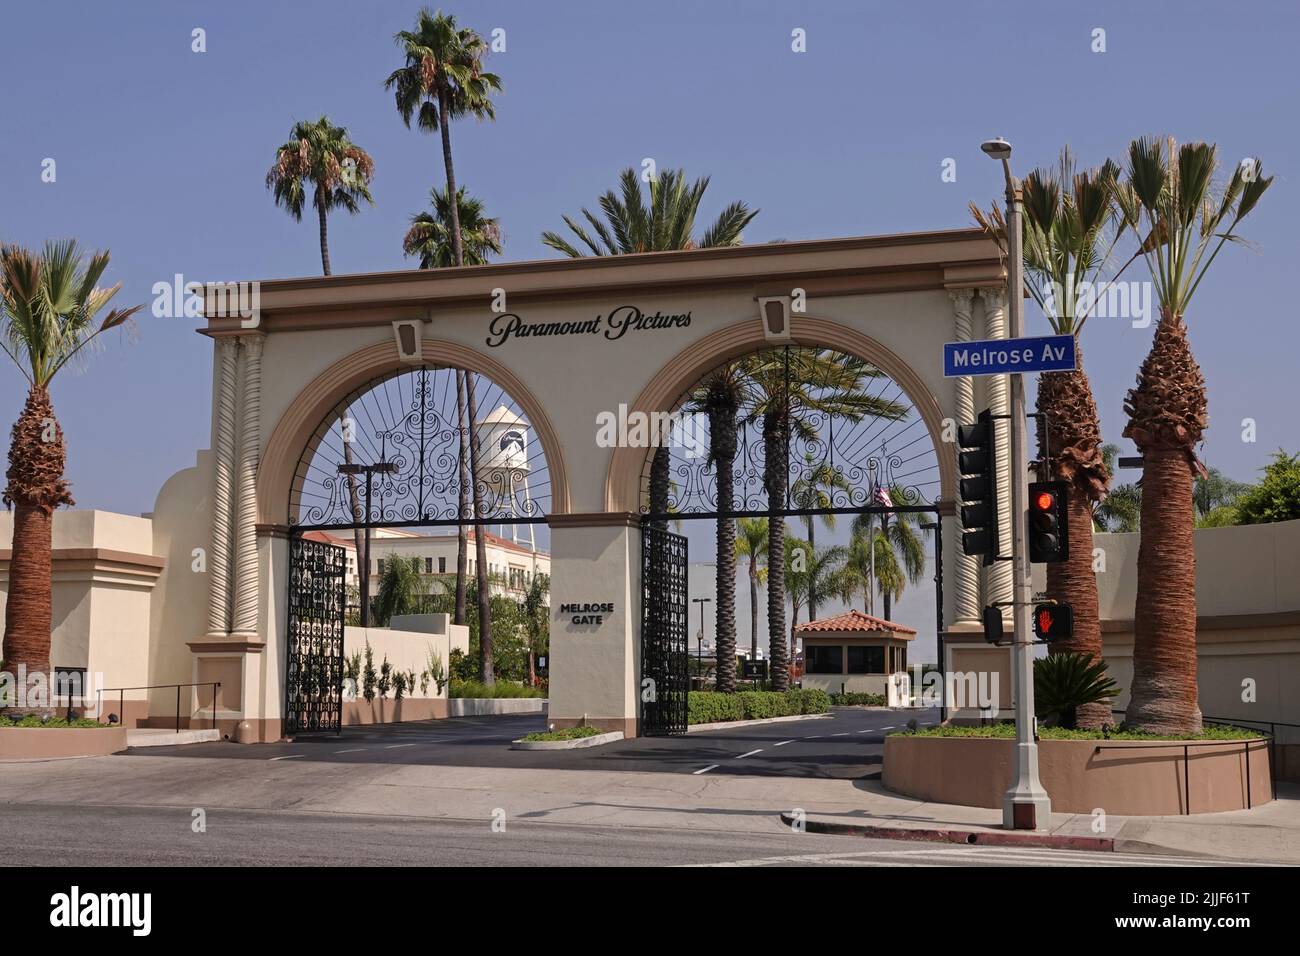 Hollywood, CA / USA - July 25, 2022: The iconic Melrose Gate on the Pictures studio lot is shown during the day. For editorial uses only. Stock Photo